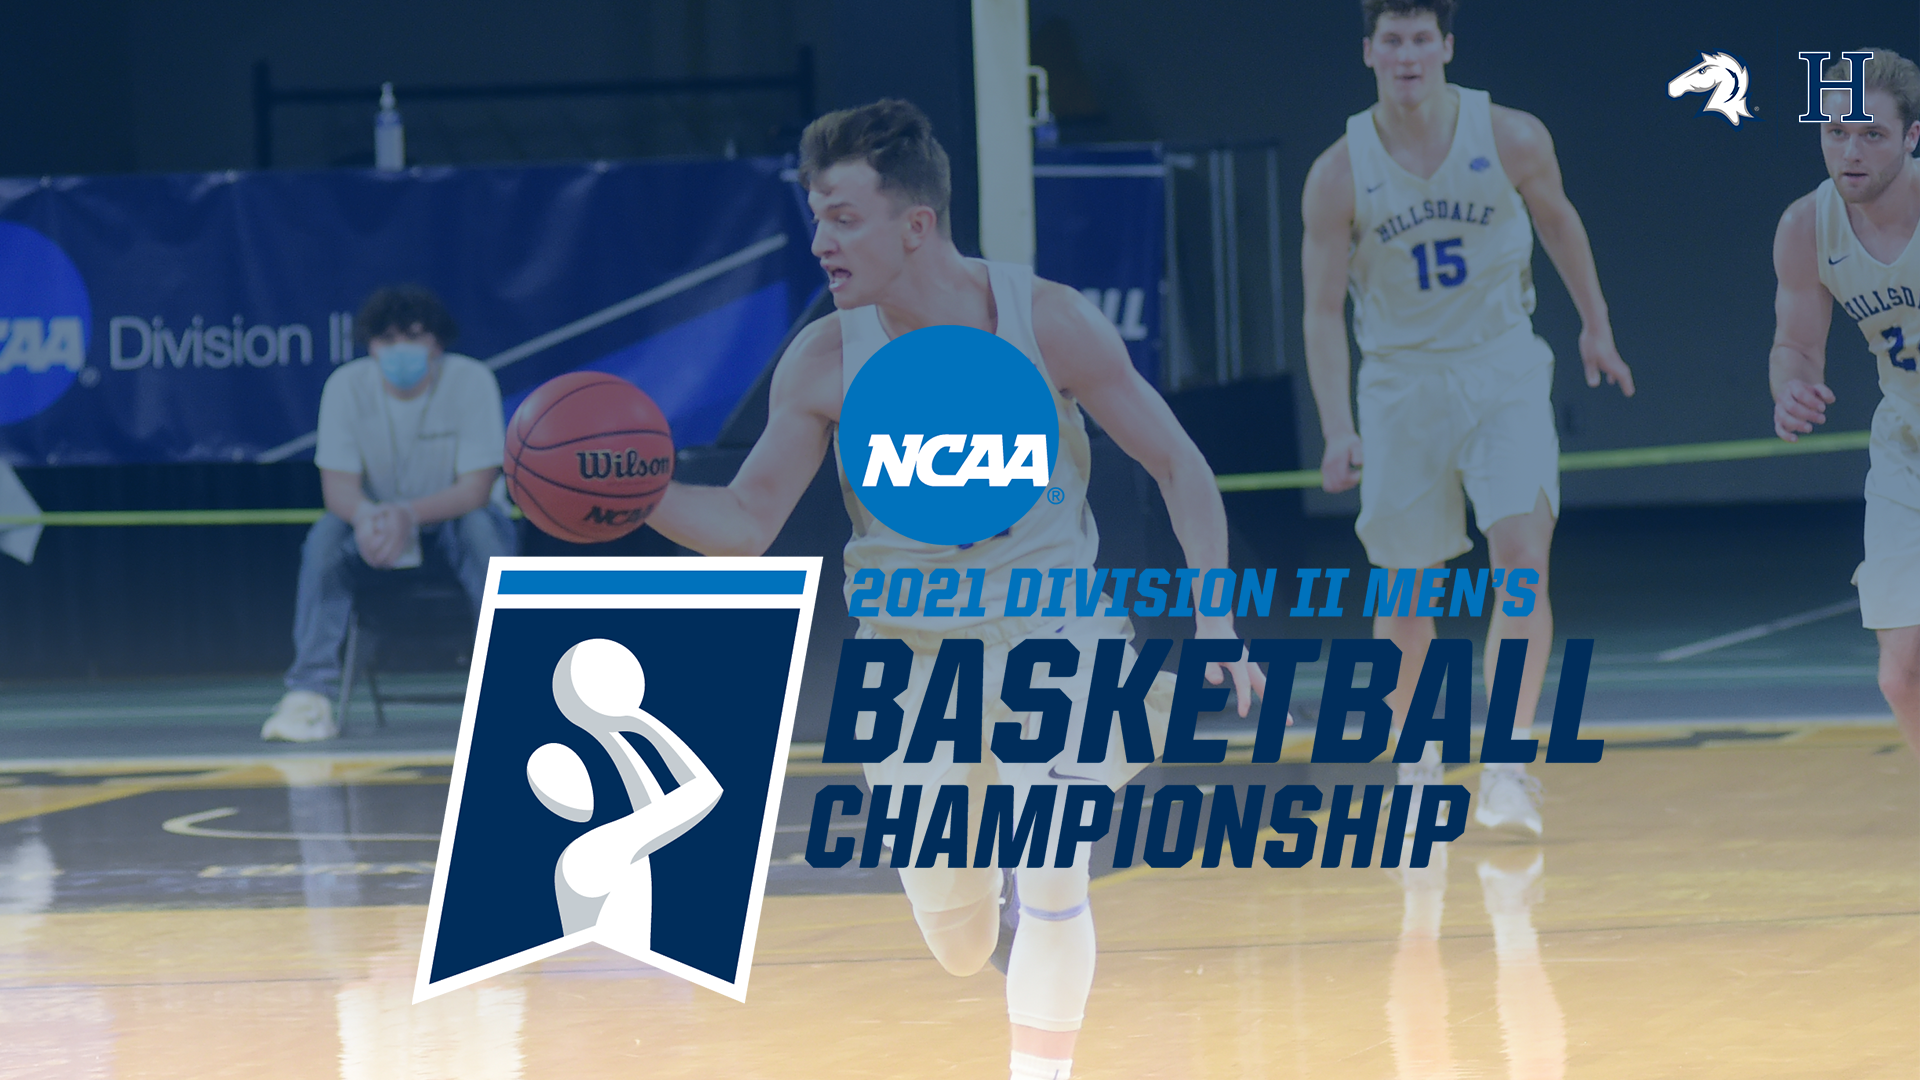 NCAA Sweet 16 Preview: Chargers face West Liberty in battle of contrasting styles